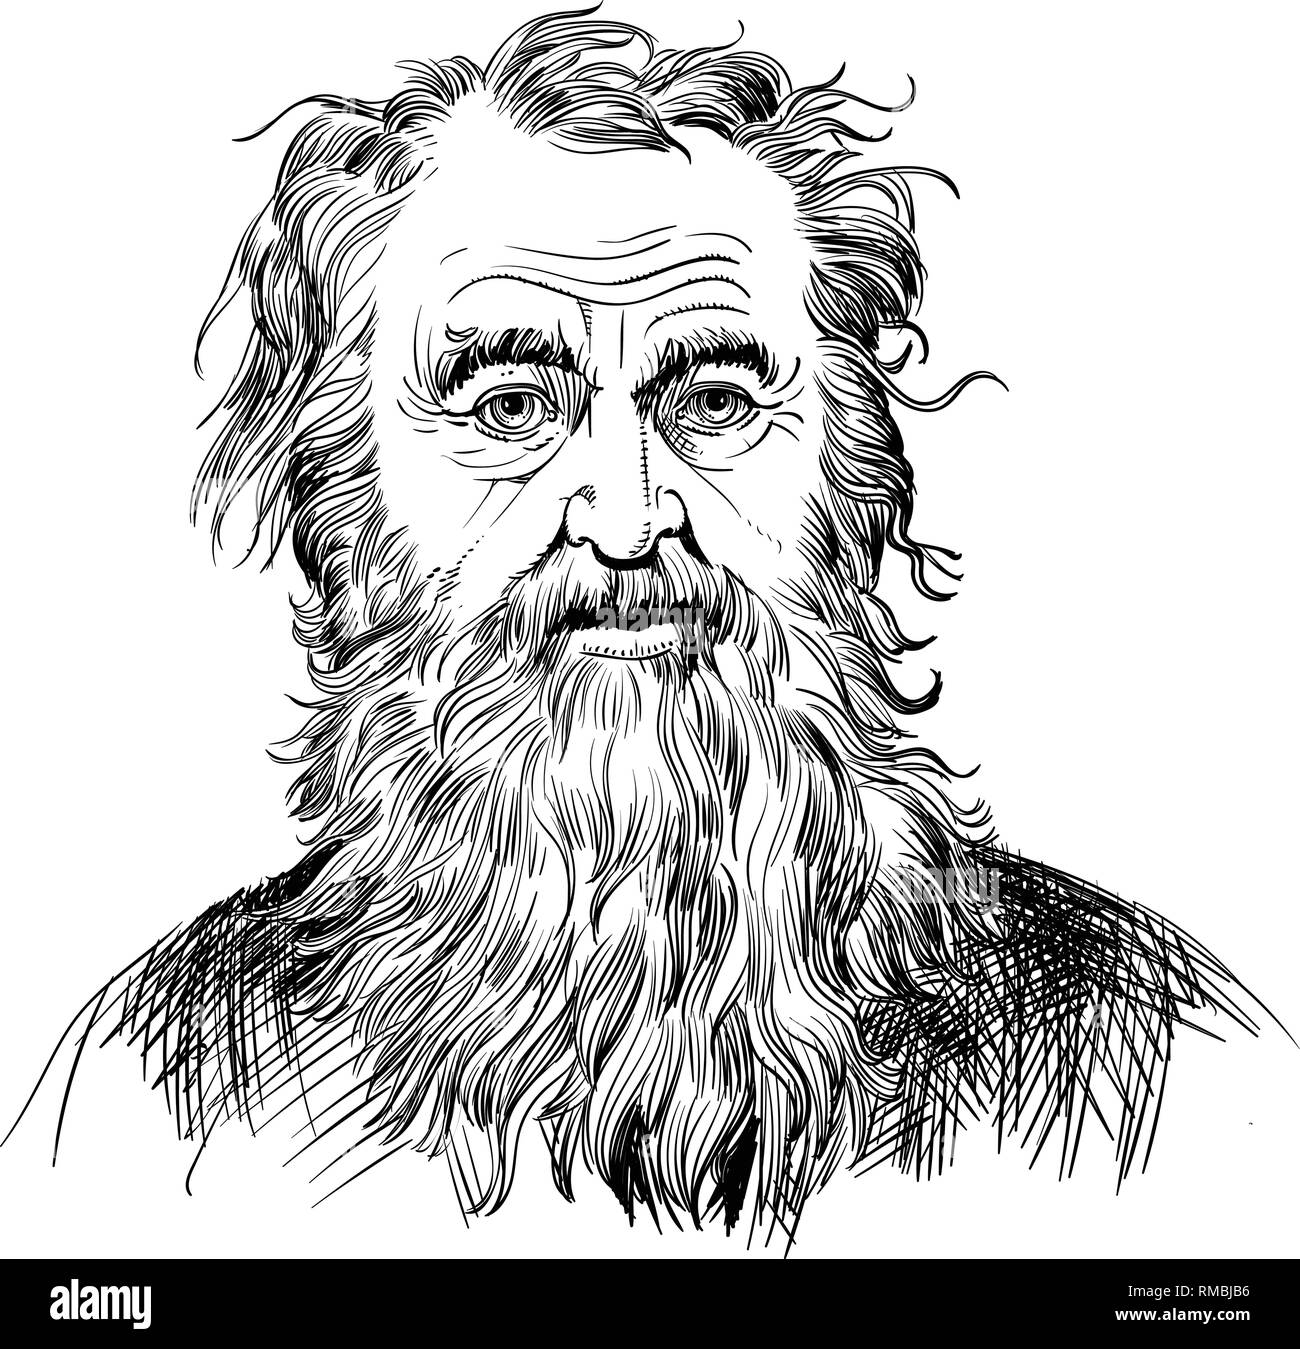 Diogenes the Cynic portrait in line art illustration. He was ancient Greek philosopher, one of the founders of the Cynic philosophy. Stock Vector